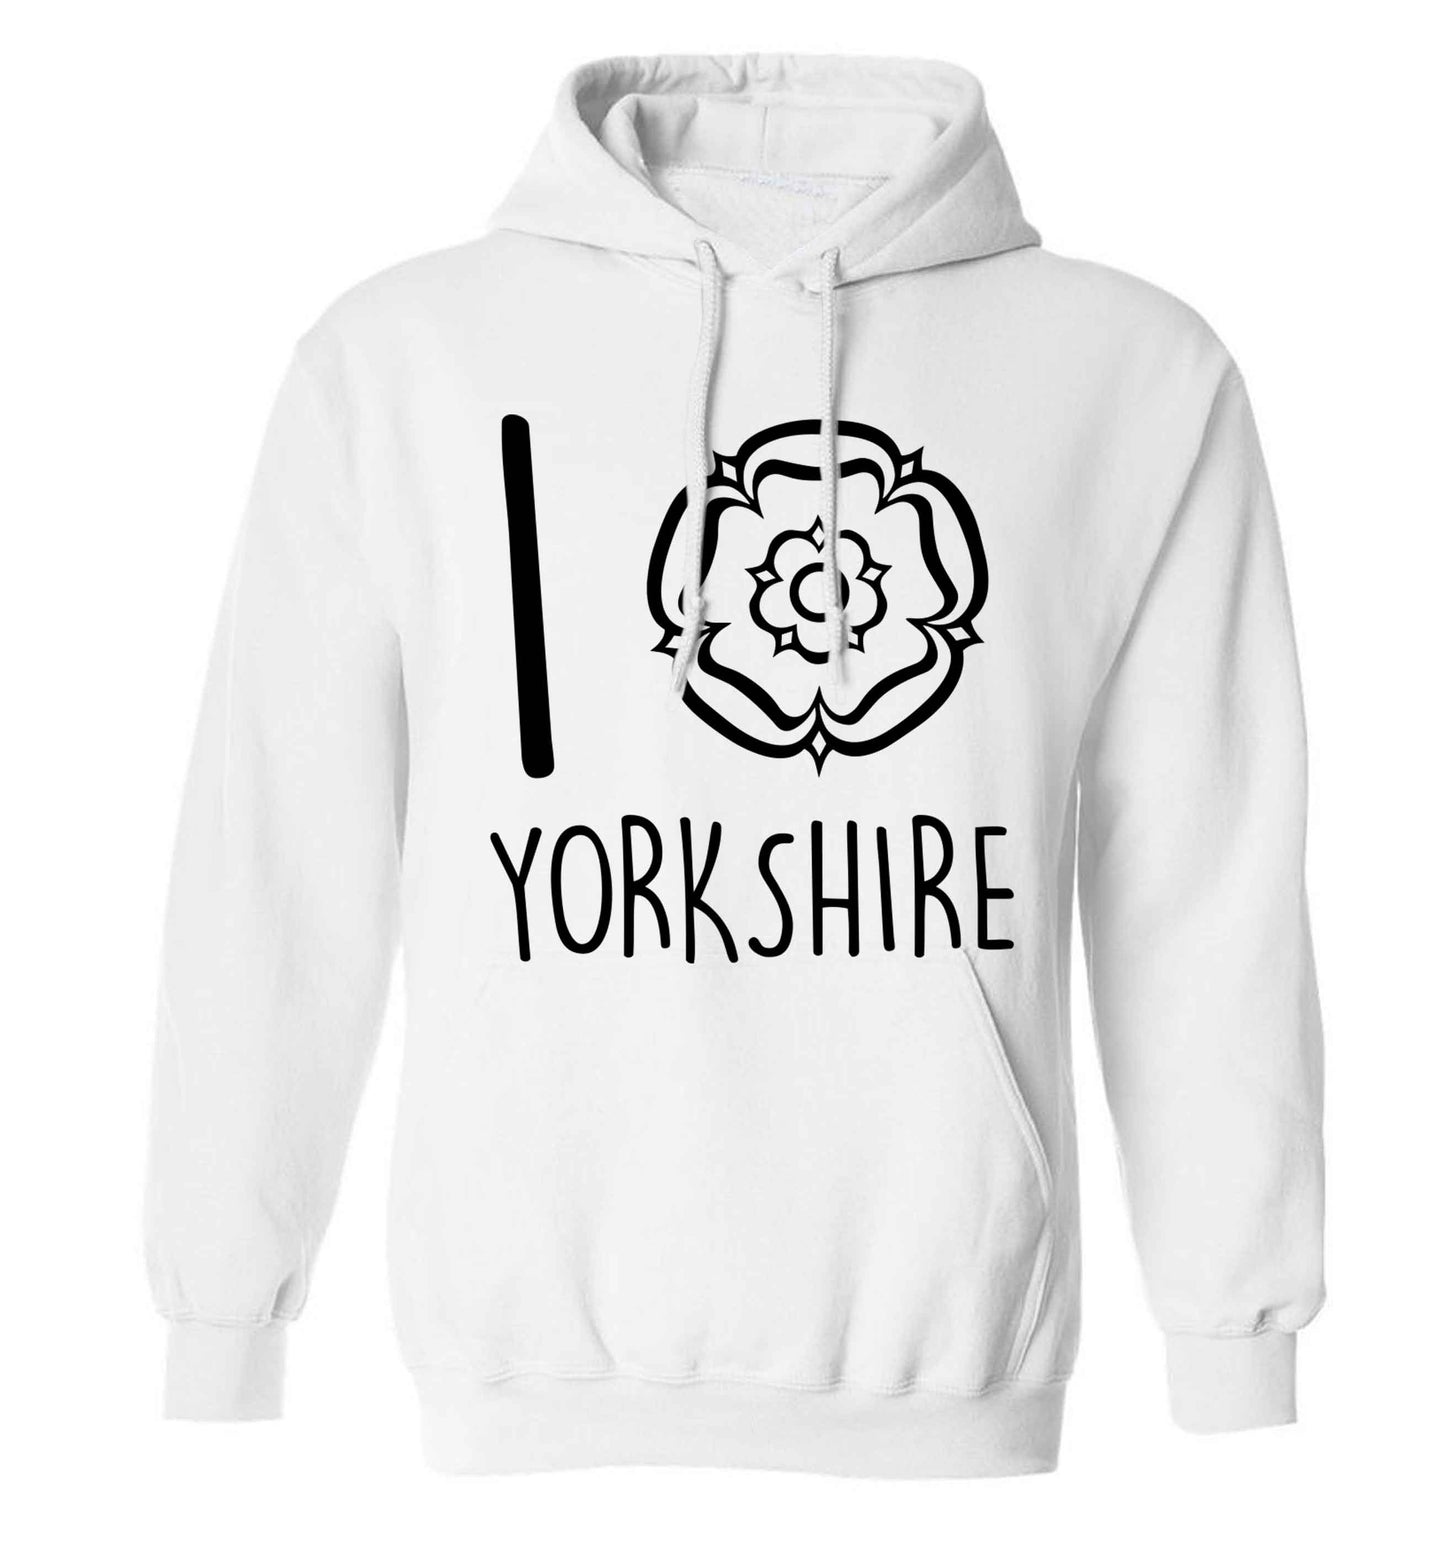 I love Yorkshire adults unisex white hoodie 2XL